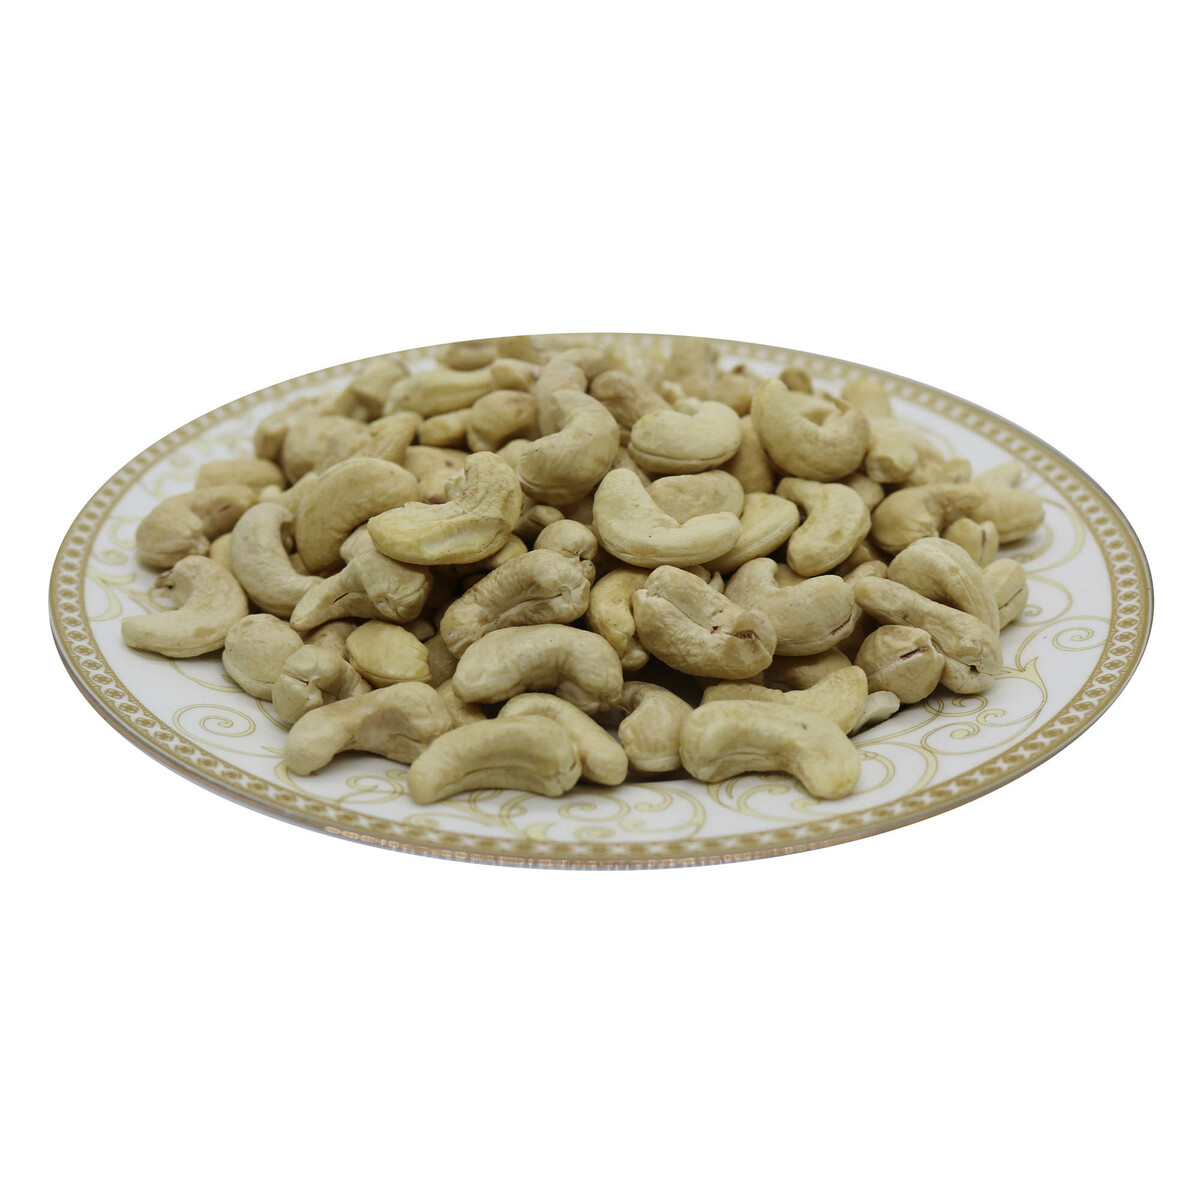 Lulu Cashew Nuts White 240 500g Approx Weight Online At Best Price Roastery Nuts Lulu Malaysia 